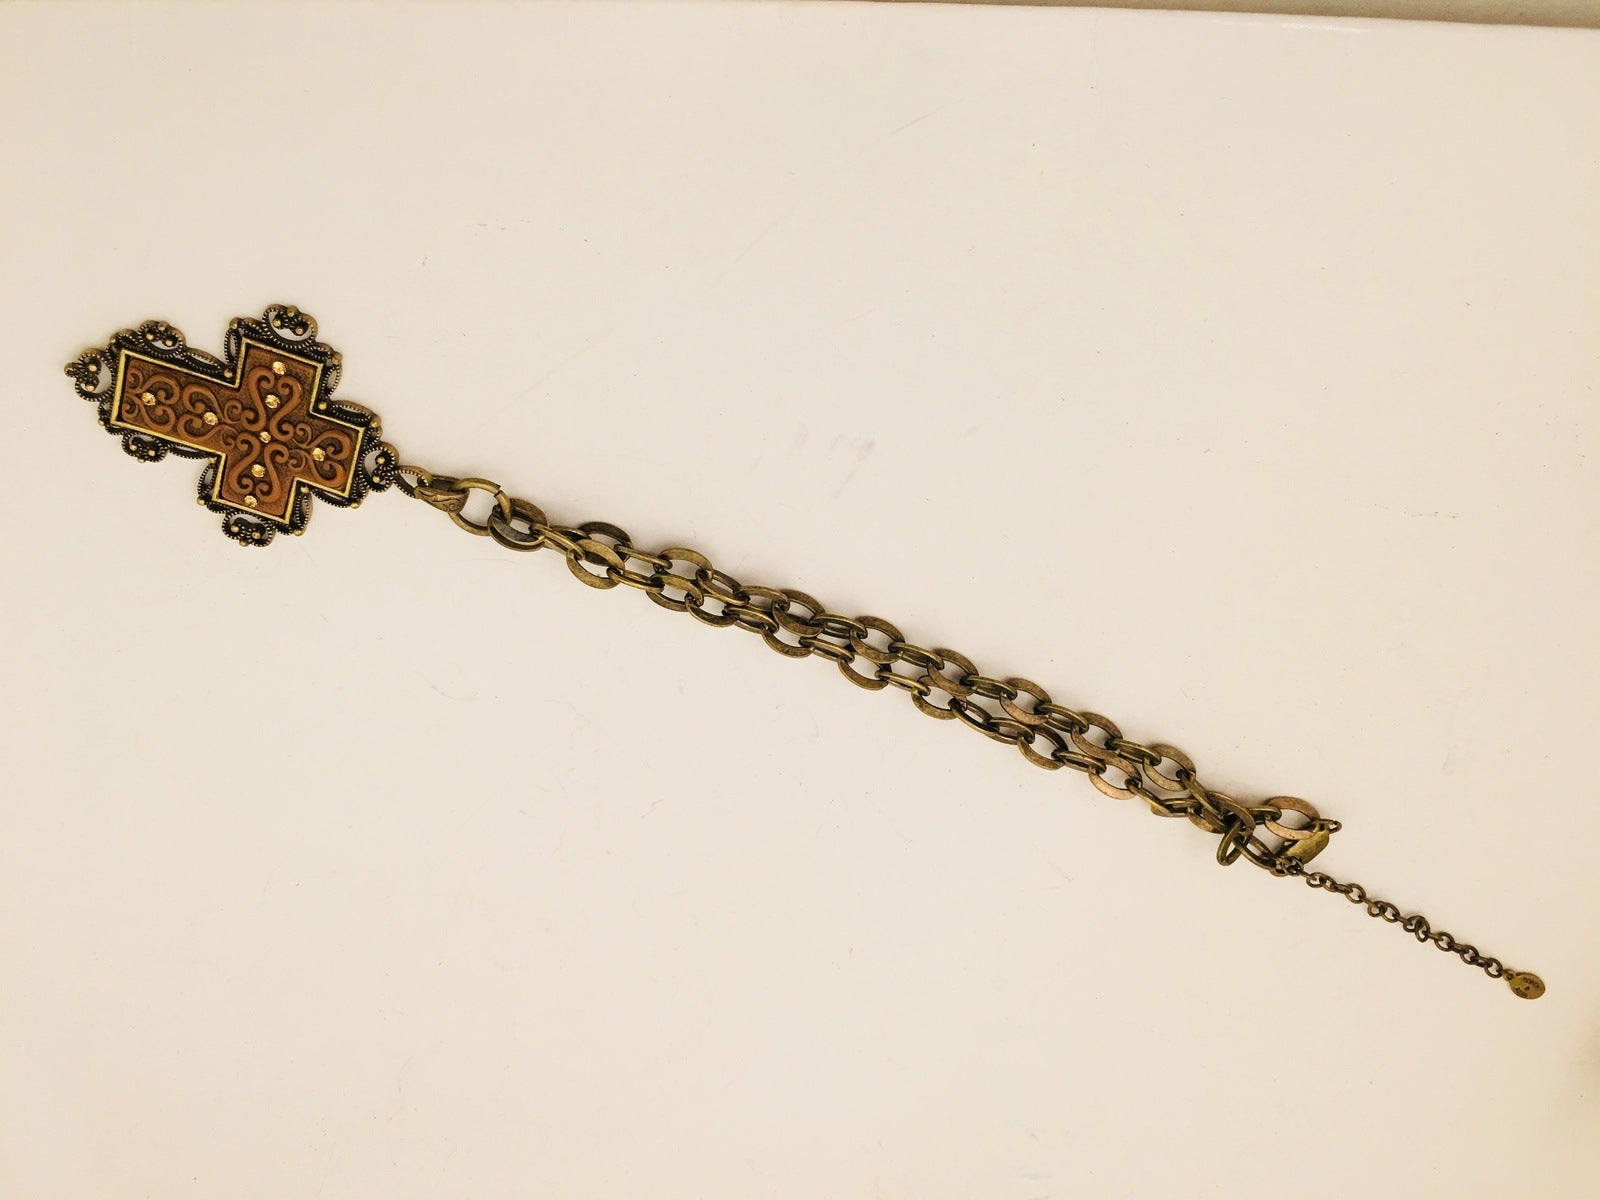 Robert Rose Cross Pendant Chain Necklace Figural Vintage Jewelry